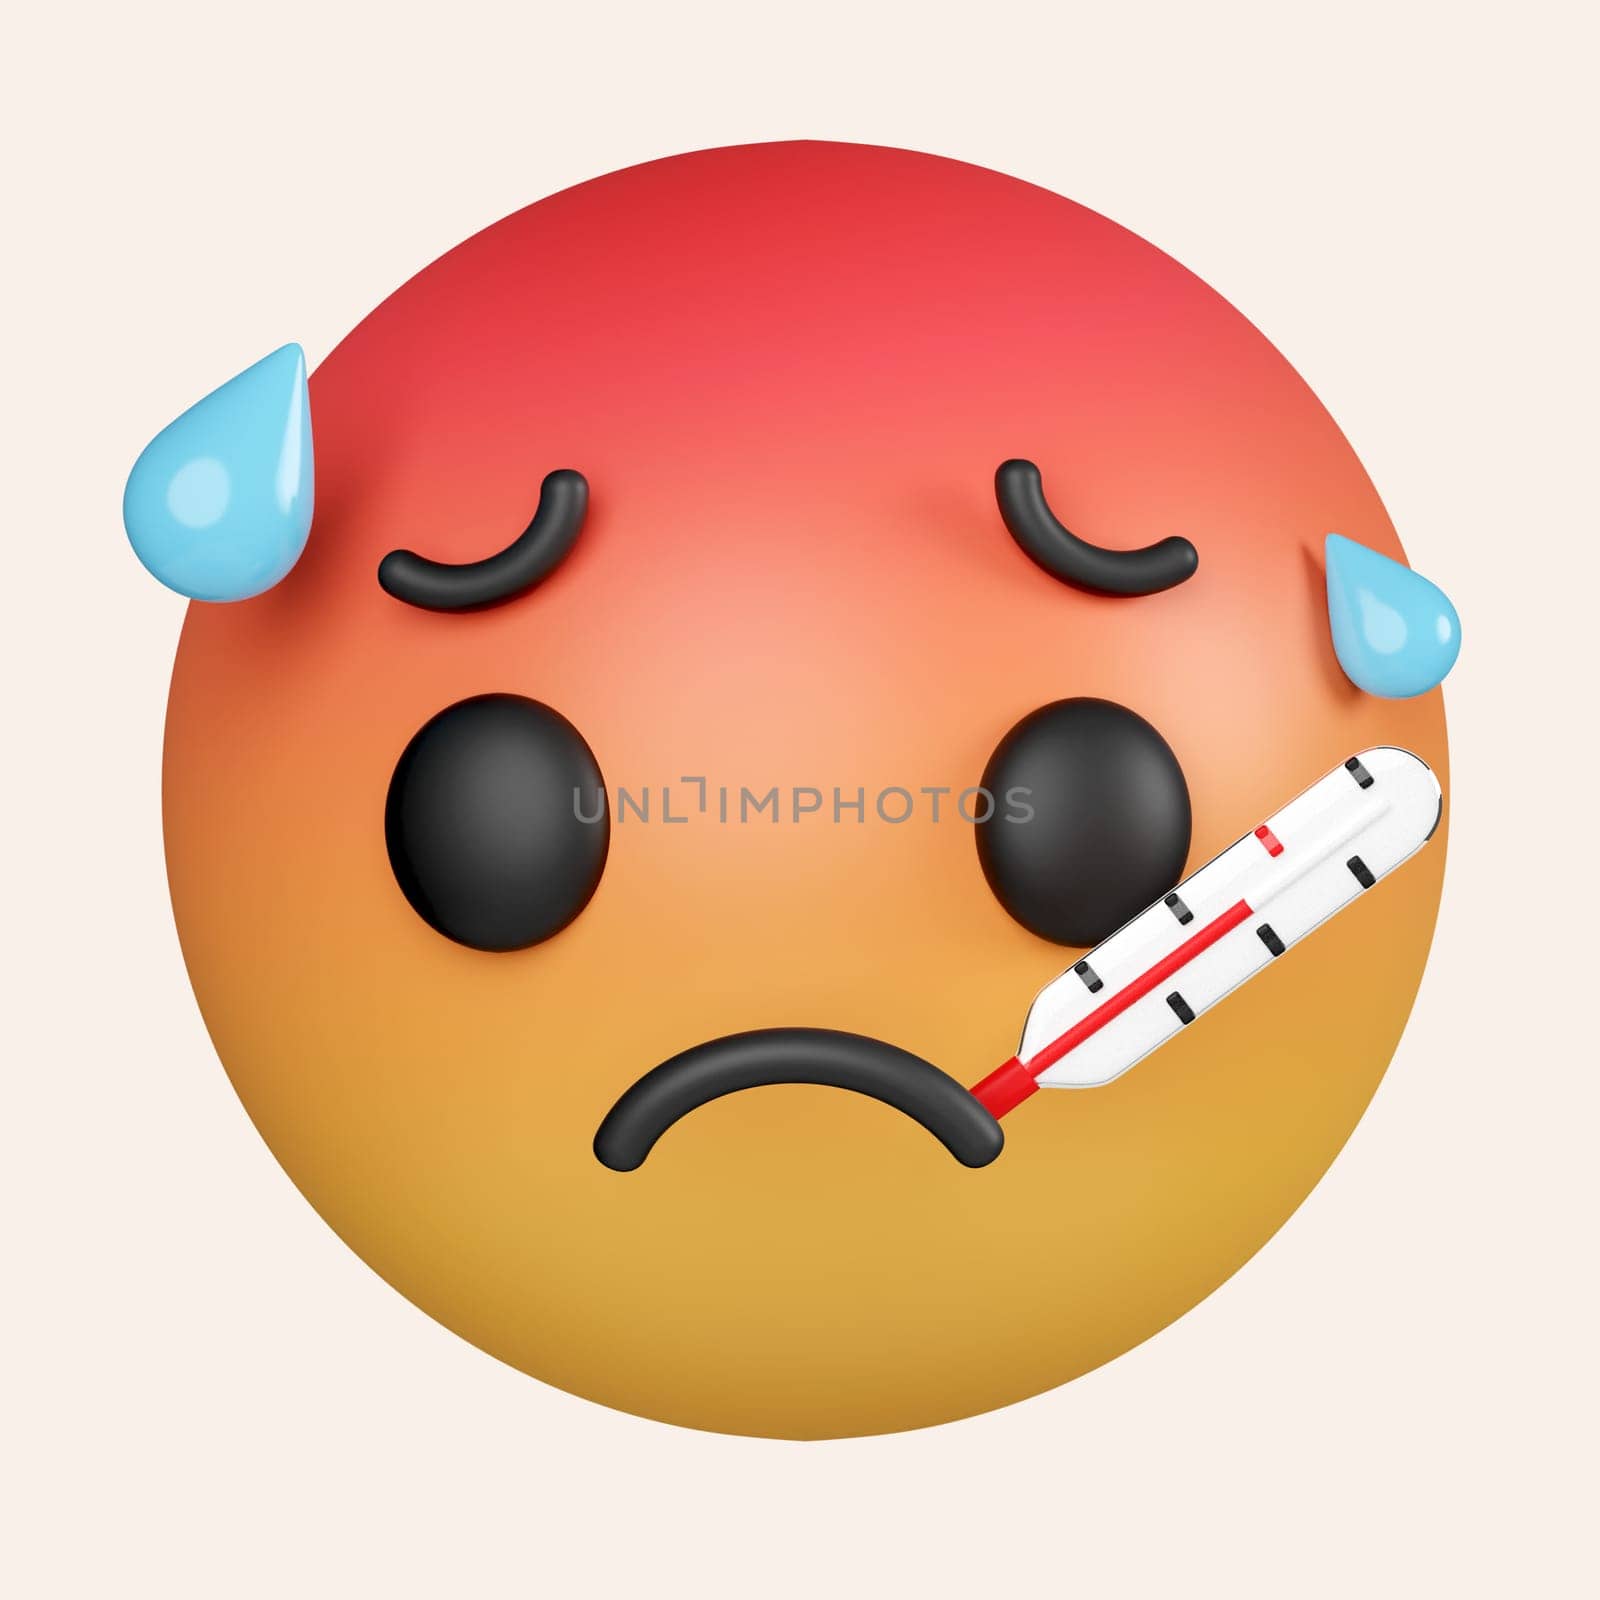 3d Thermometer in mouth emoji. Sick emoticon with high fever. Chat Elements. Doctor Virus Protection. icon isolated on gray background. 3d rendering illustration. Clipping path. by meepiangraphic